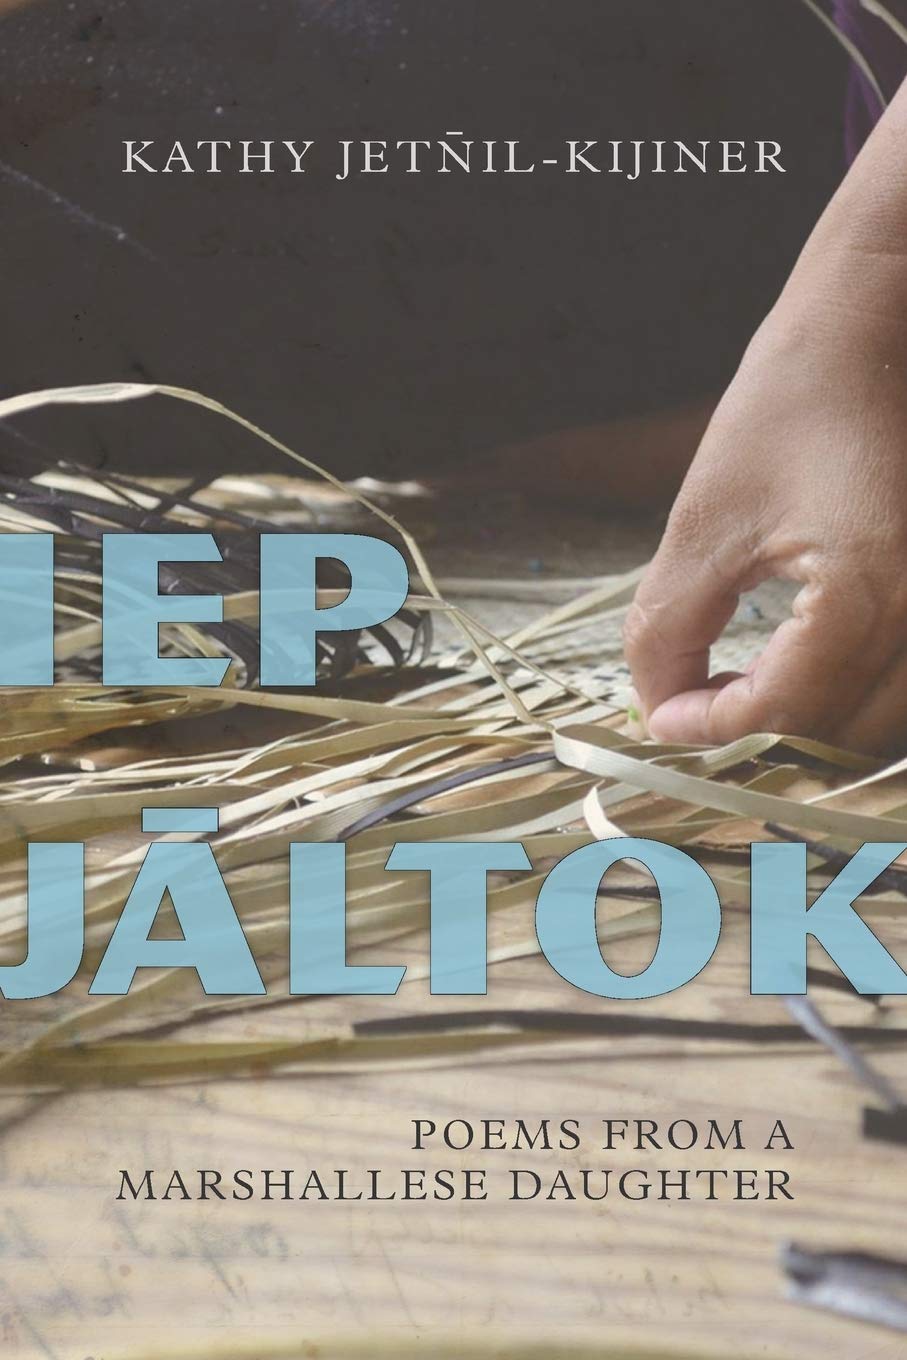 Iep Jāltok: Poems from a Marshallese Daughter by Kathy Jetn̄il-Kijiner book cover